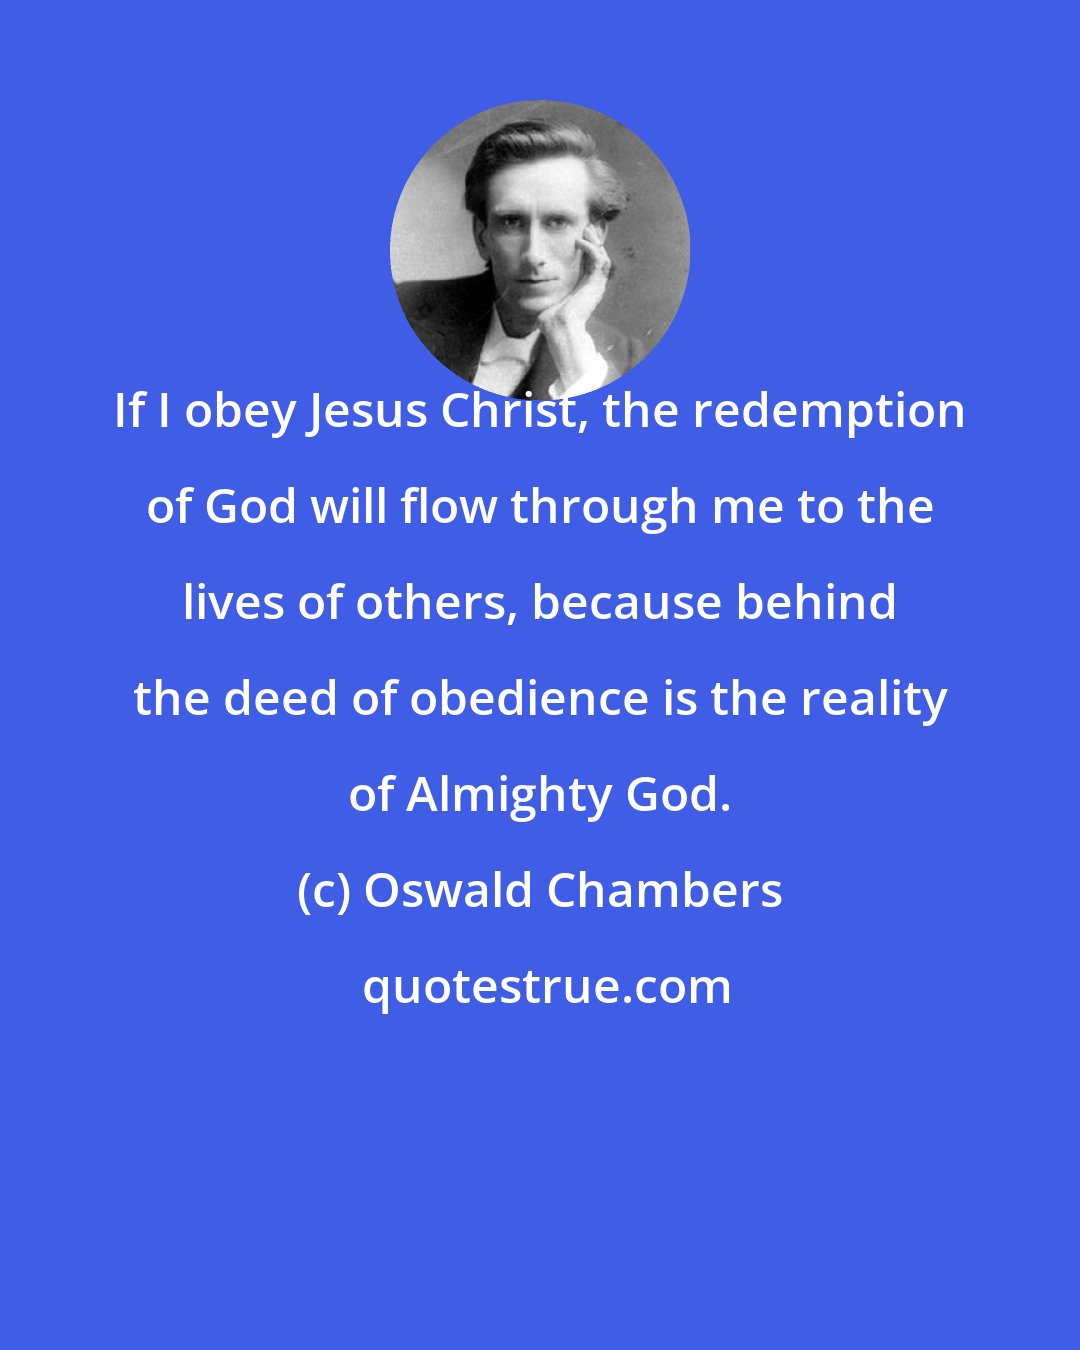 Oswald Chambers: If I obey Jesus Christ, the redemption of God will flow through me to the lives of others, because behind the deed of obedience is the reality of Almighty God.